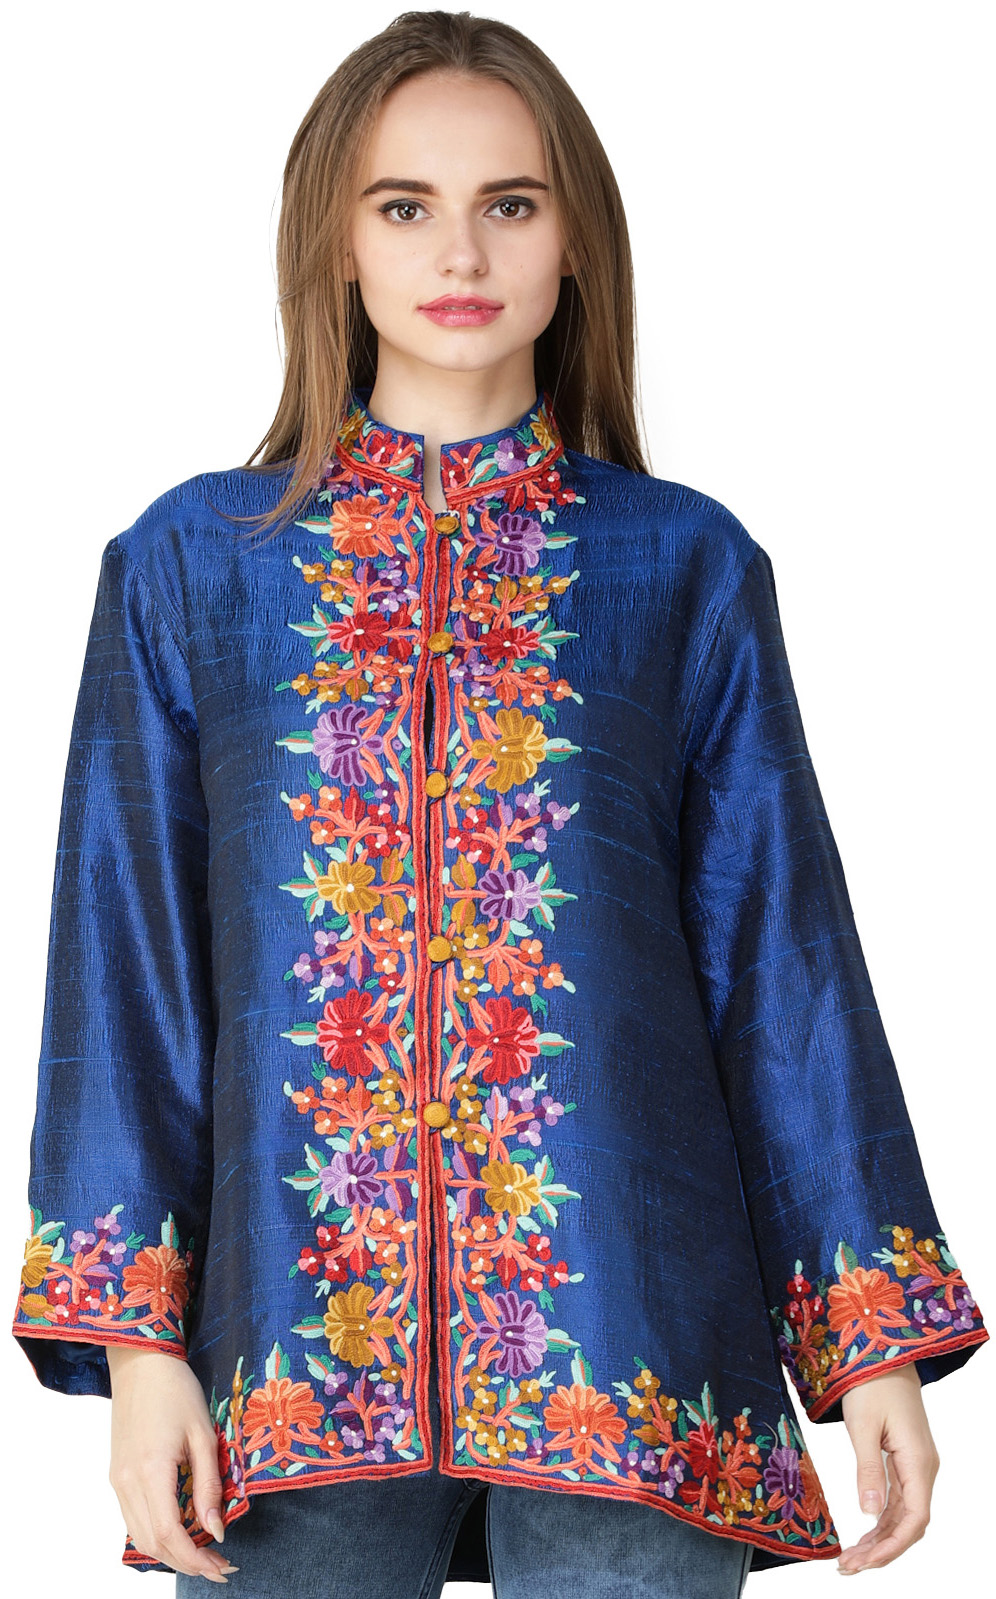 True-Blue Jacket from Kashmir with Florals Embroidered By Hand on Neck ...